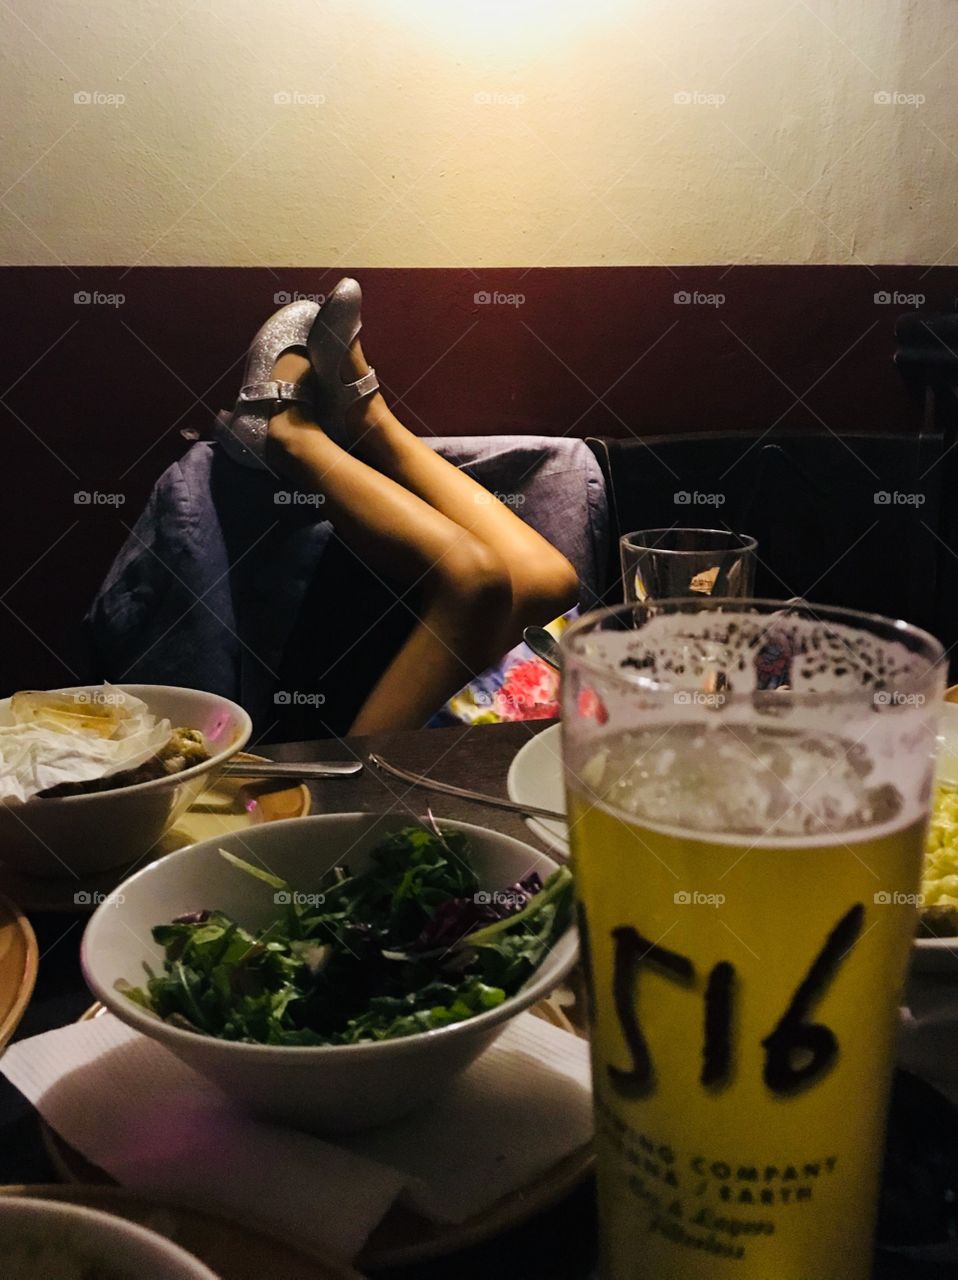 A child kicks up her feet in sparkling shoes at the dinner table in a restaurant 